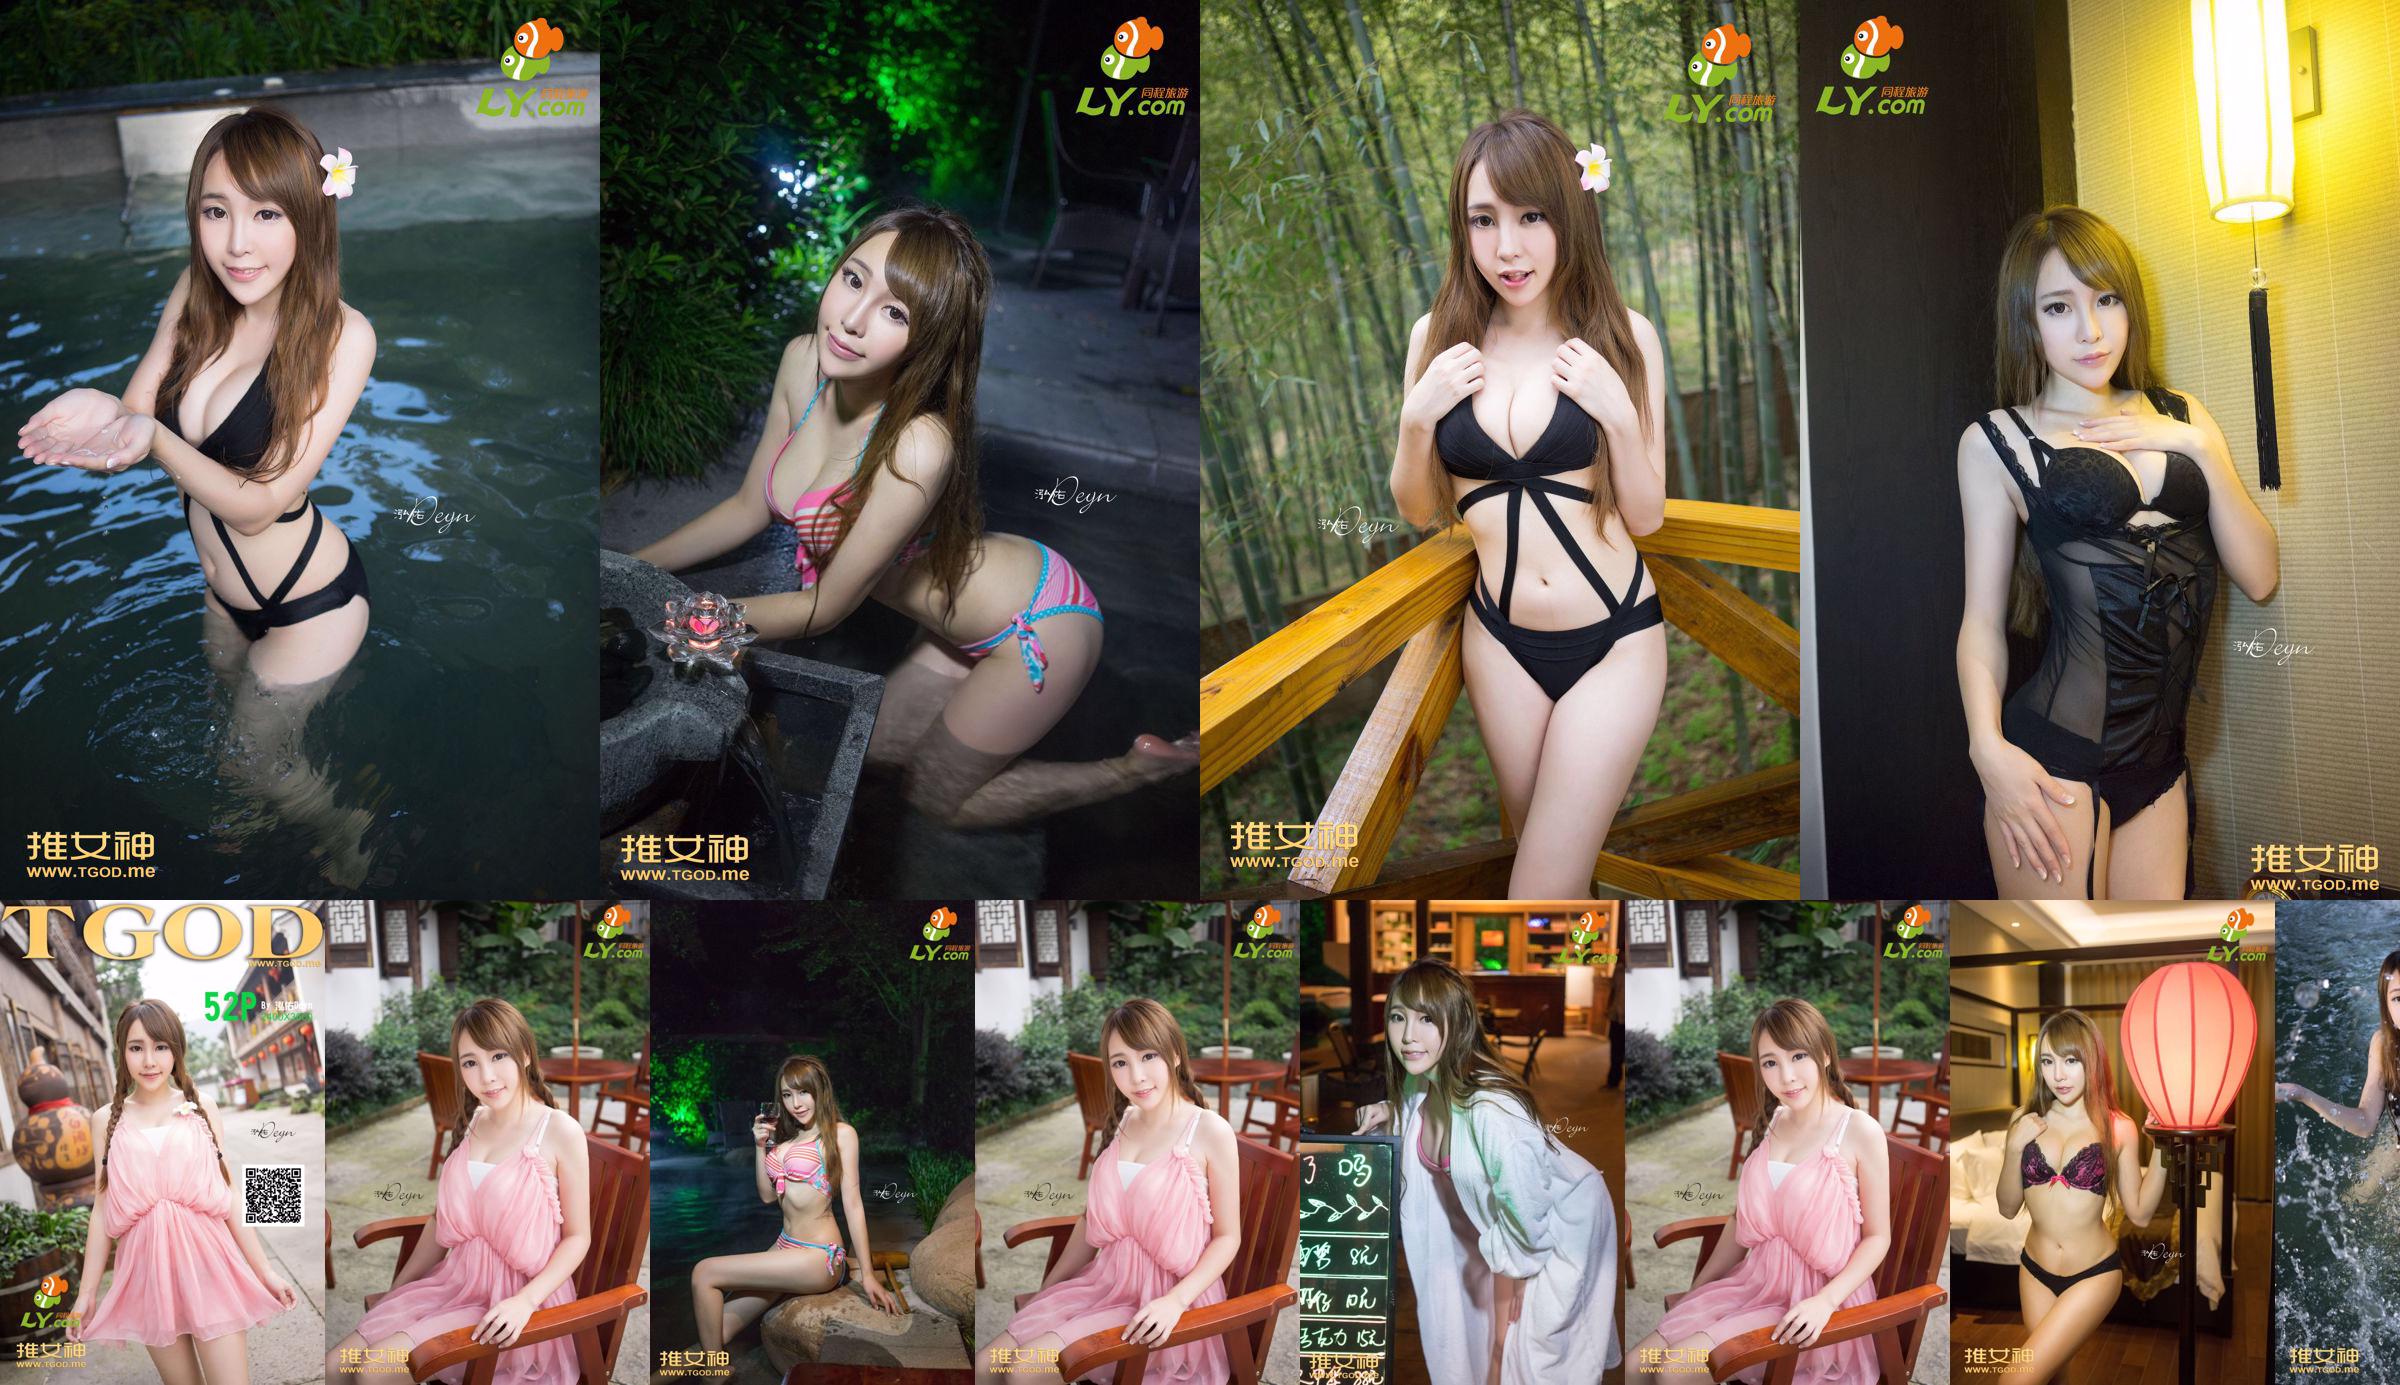 Huang Mengxian "Where Is the Goddess Going Issue 7" [TGOD Push Goddess] No.e61d25 Pagina 1